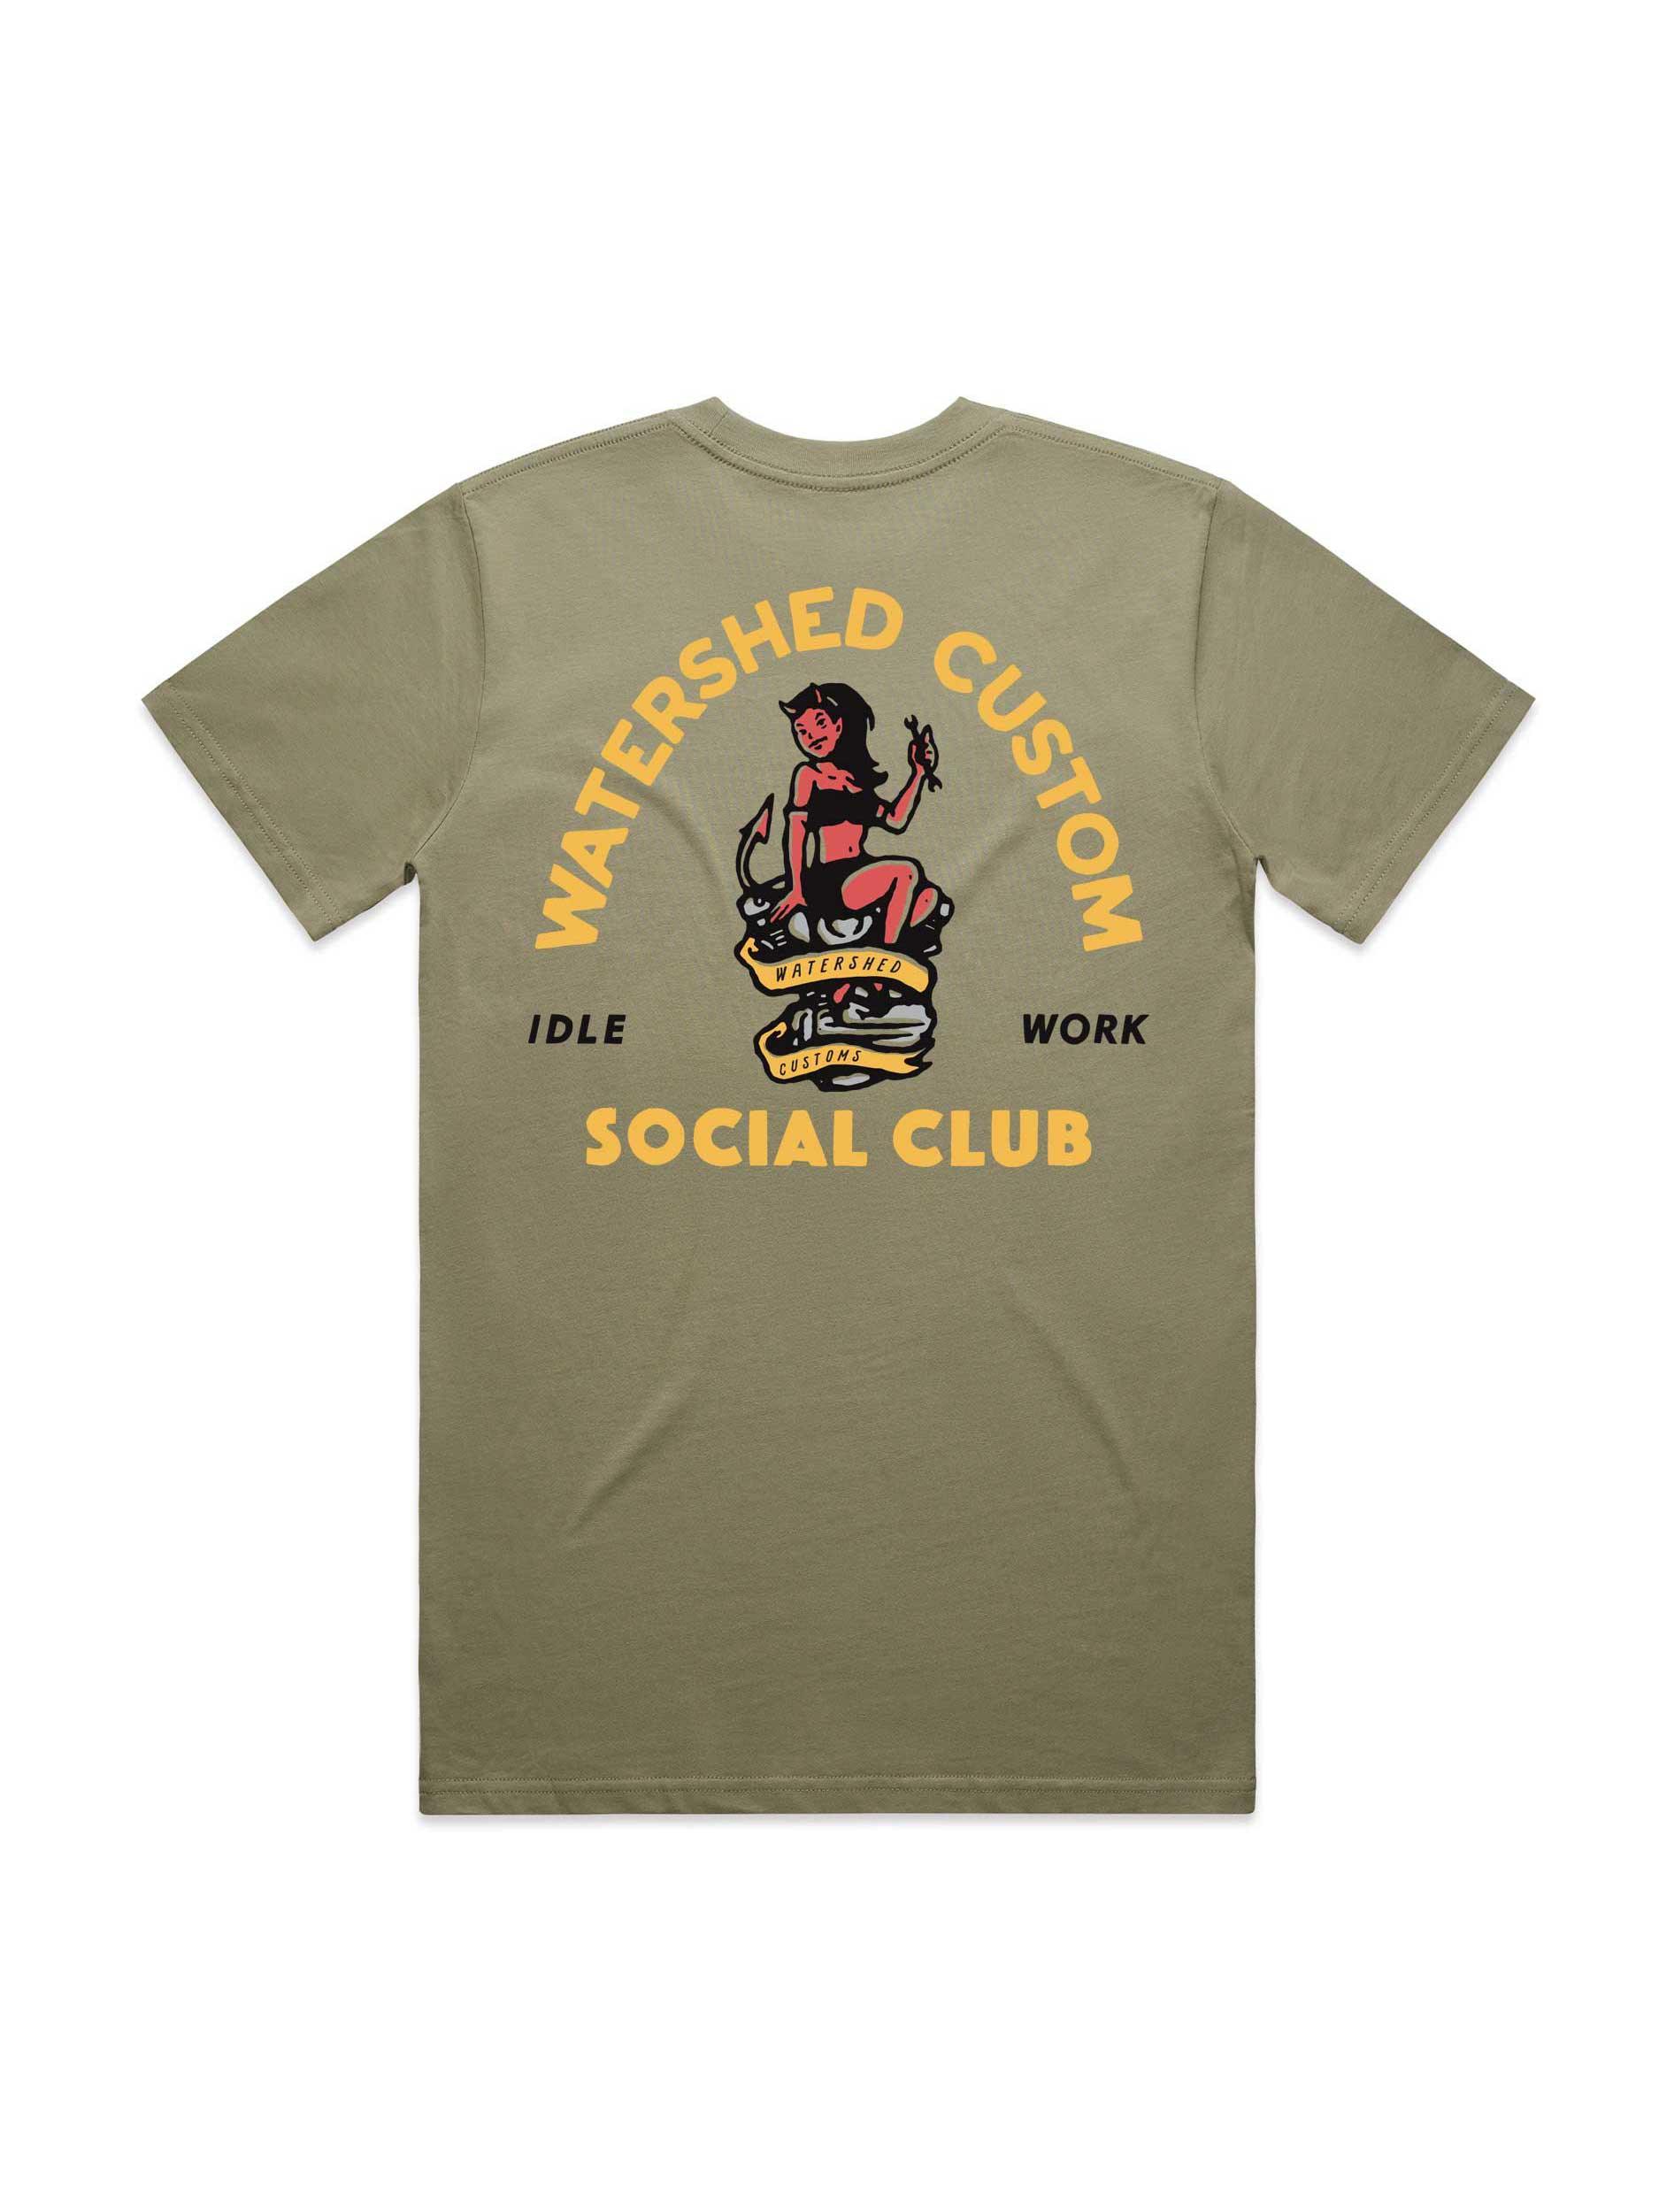 Idle Hands T-Shirt - Watershed Brand